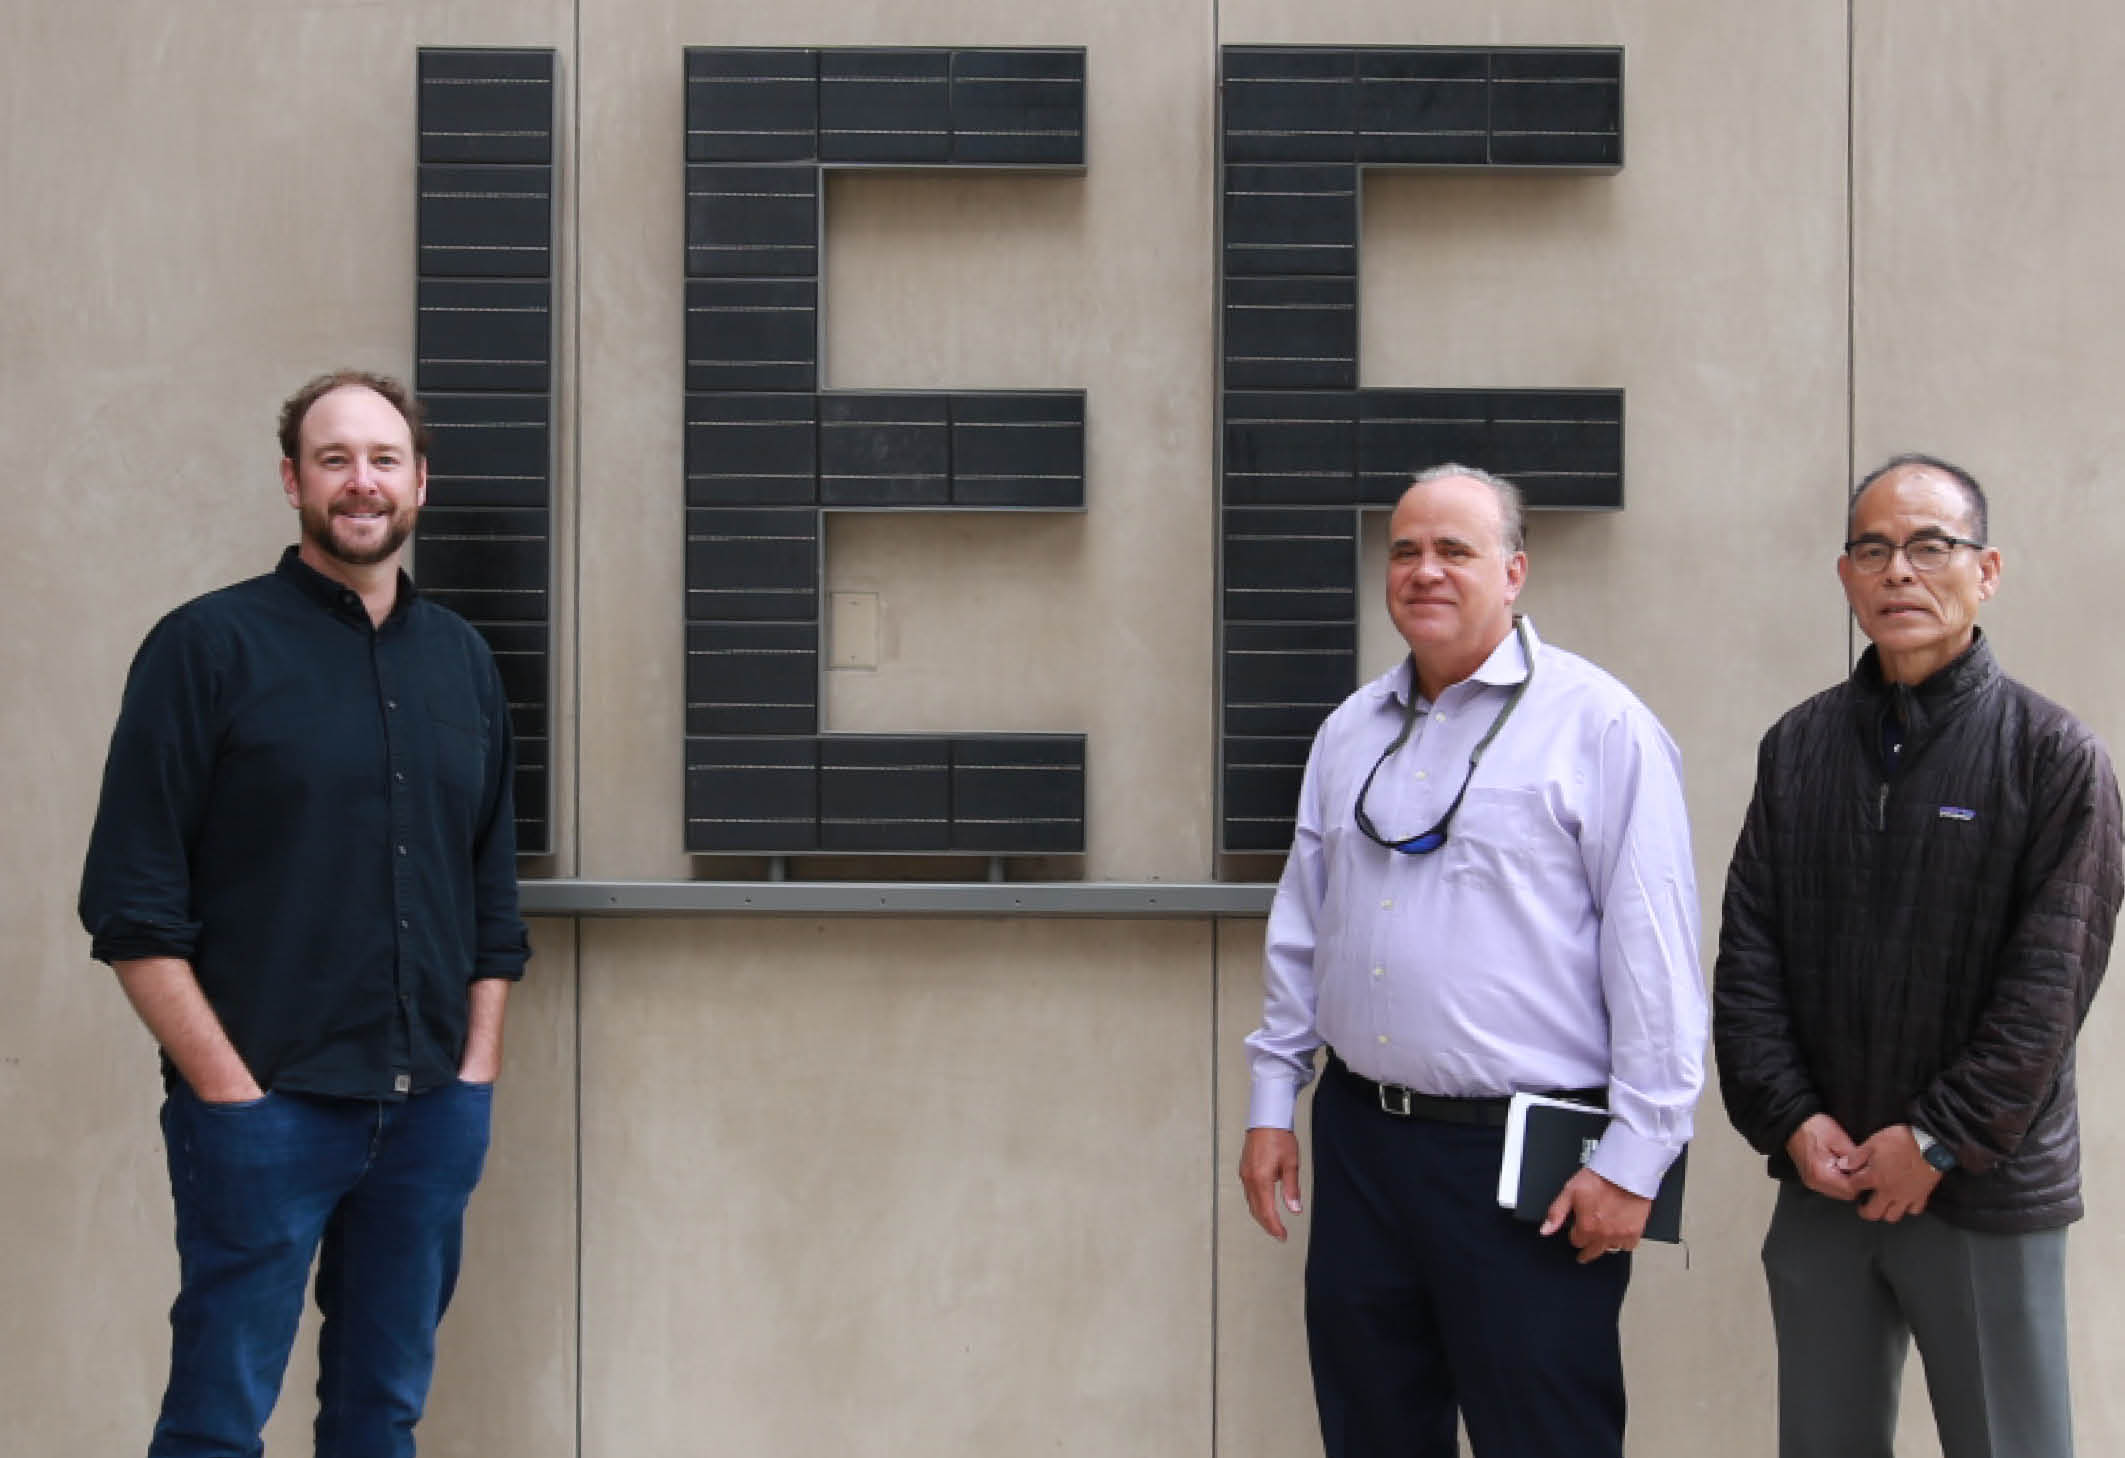 Phillip Christopher, Steven DenBaars, and Shuji Nakamura standing in front of building with large IEE lettering.